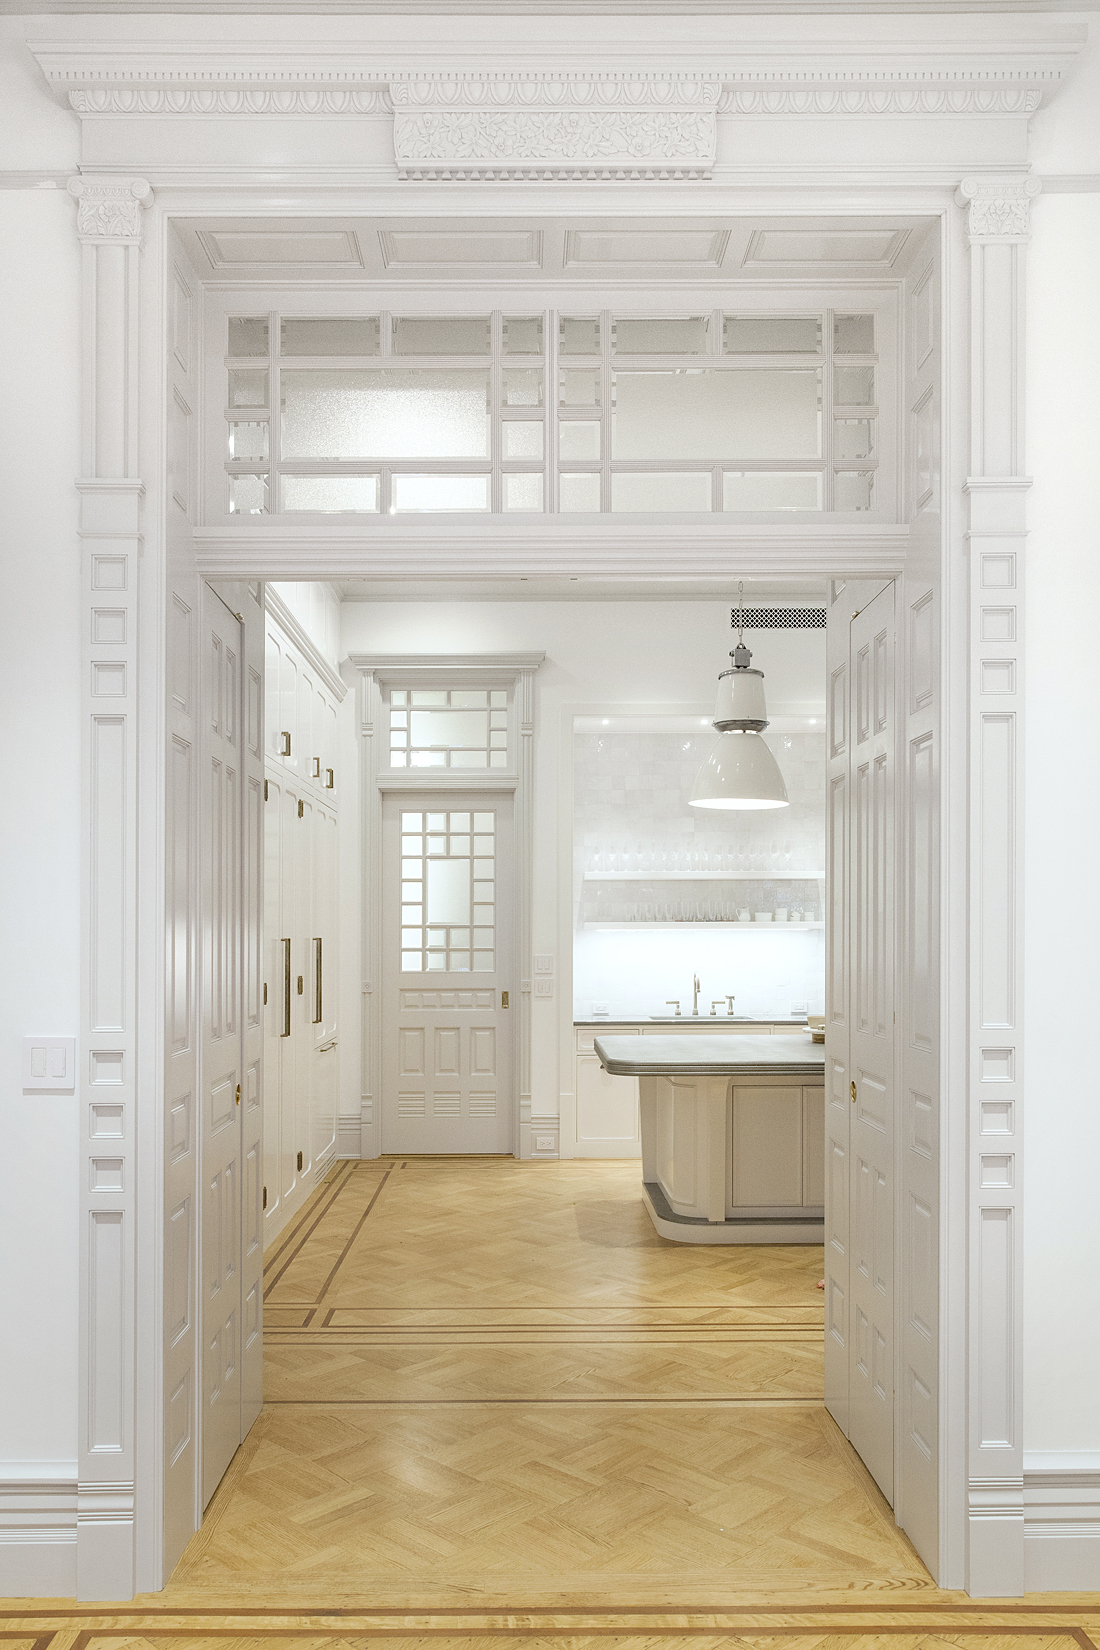 Timeless White Kitchen by Reunion Goods & Services and Fogarty Finger Architecture